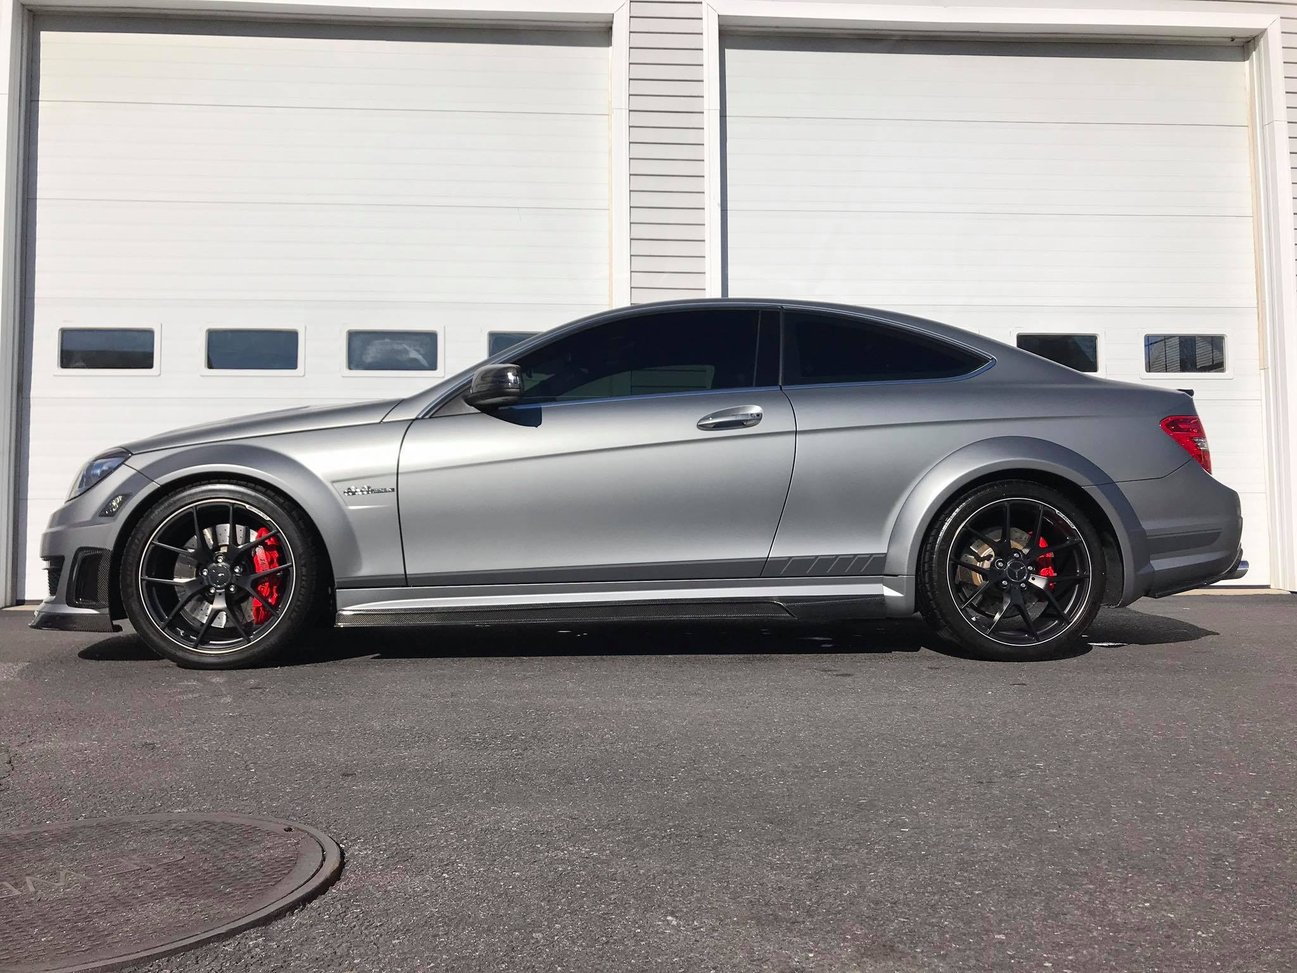 2015 Mercedes-Benz C63 AMG - FS: 15" C63 AMG 507 Edition Matte Grey (HMS) - Used - VIN WDDGJ7HB3FG373565 - 11,000 Miles - 8 cyl - 2WD - Automatic - Coupe - Gray - Weston, MA 02493, United States